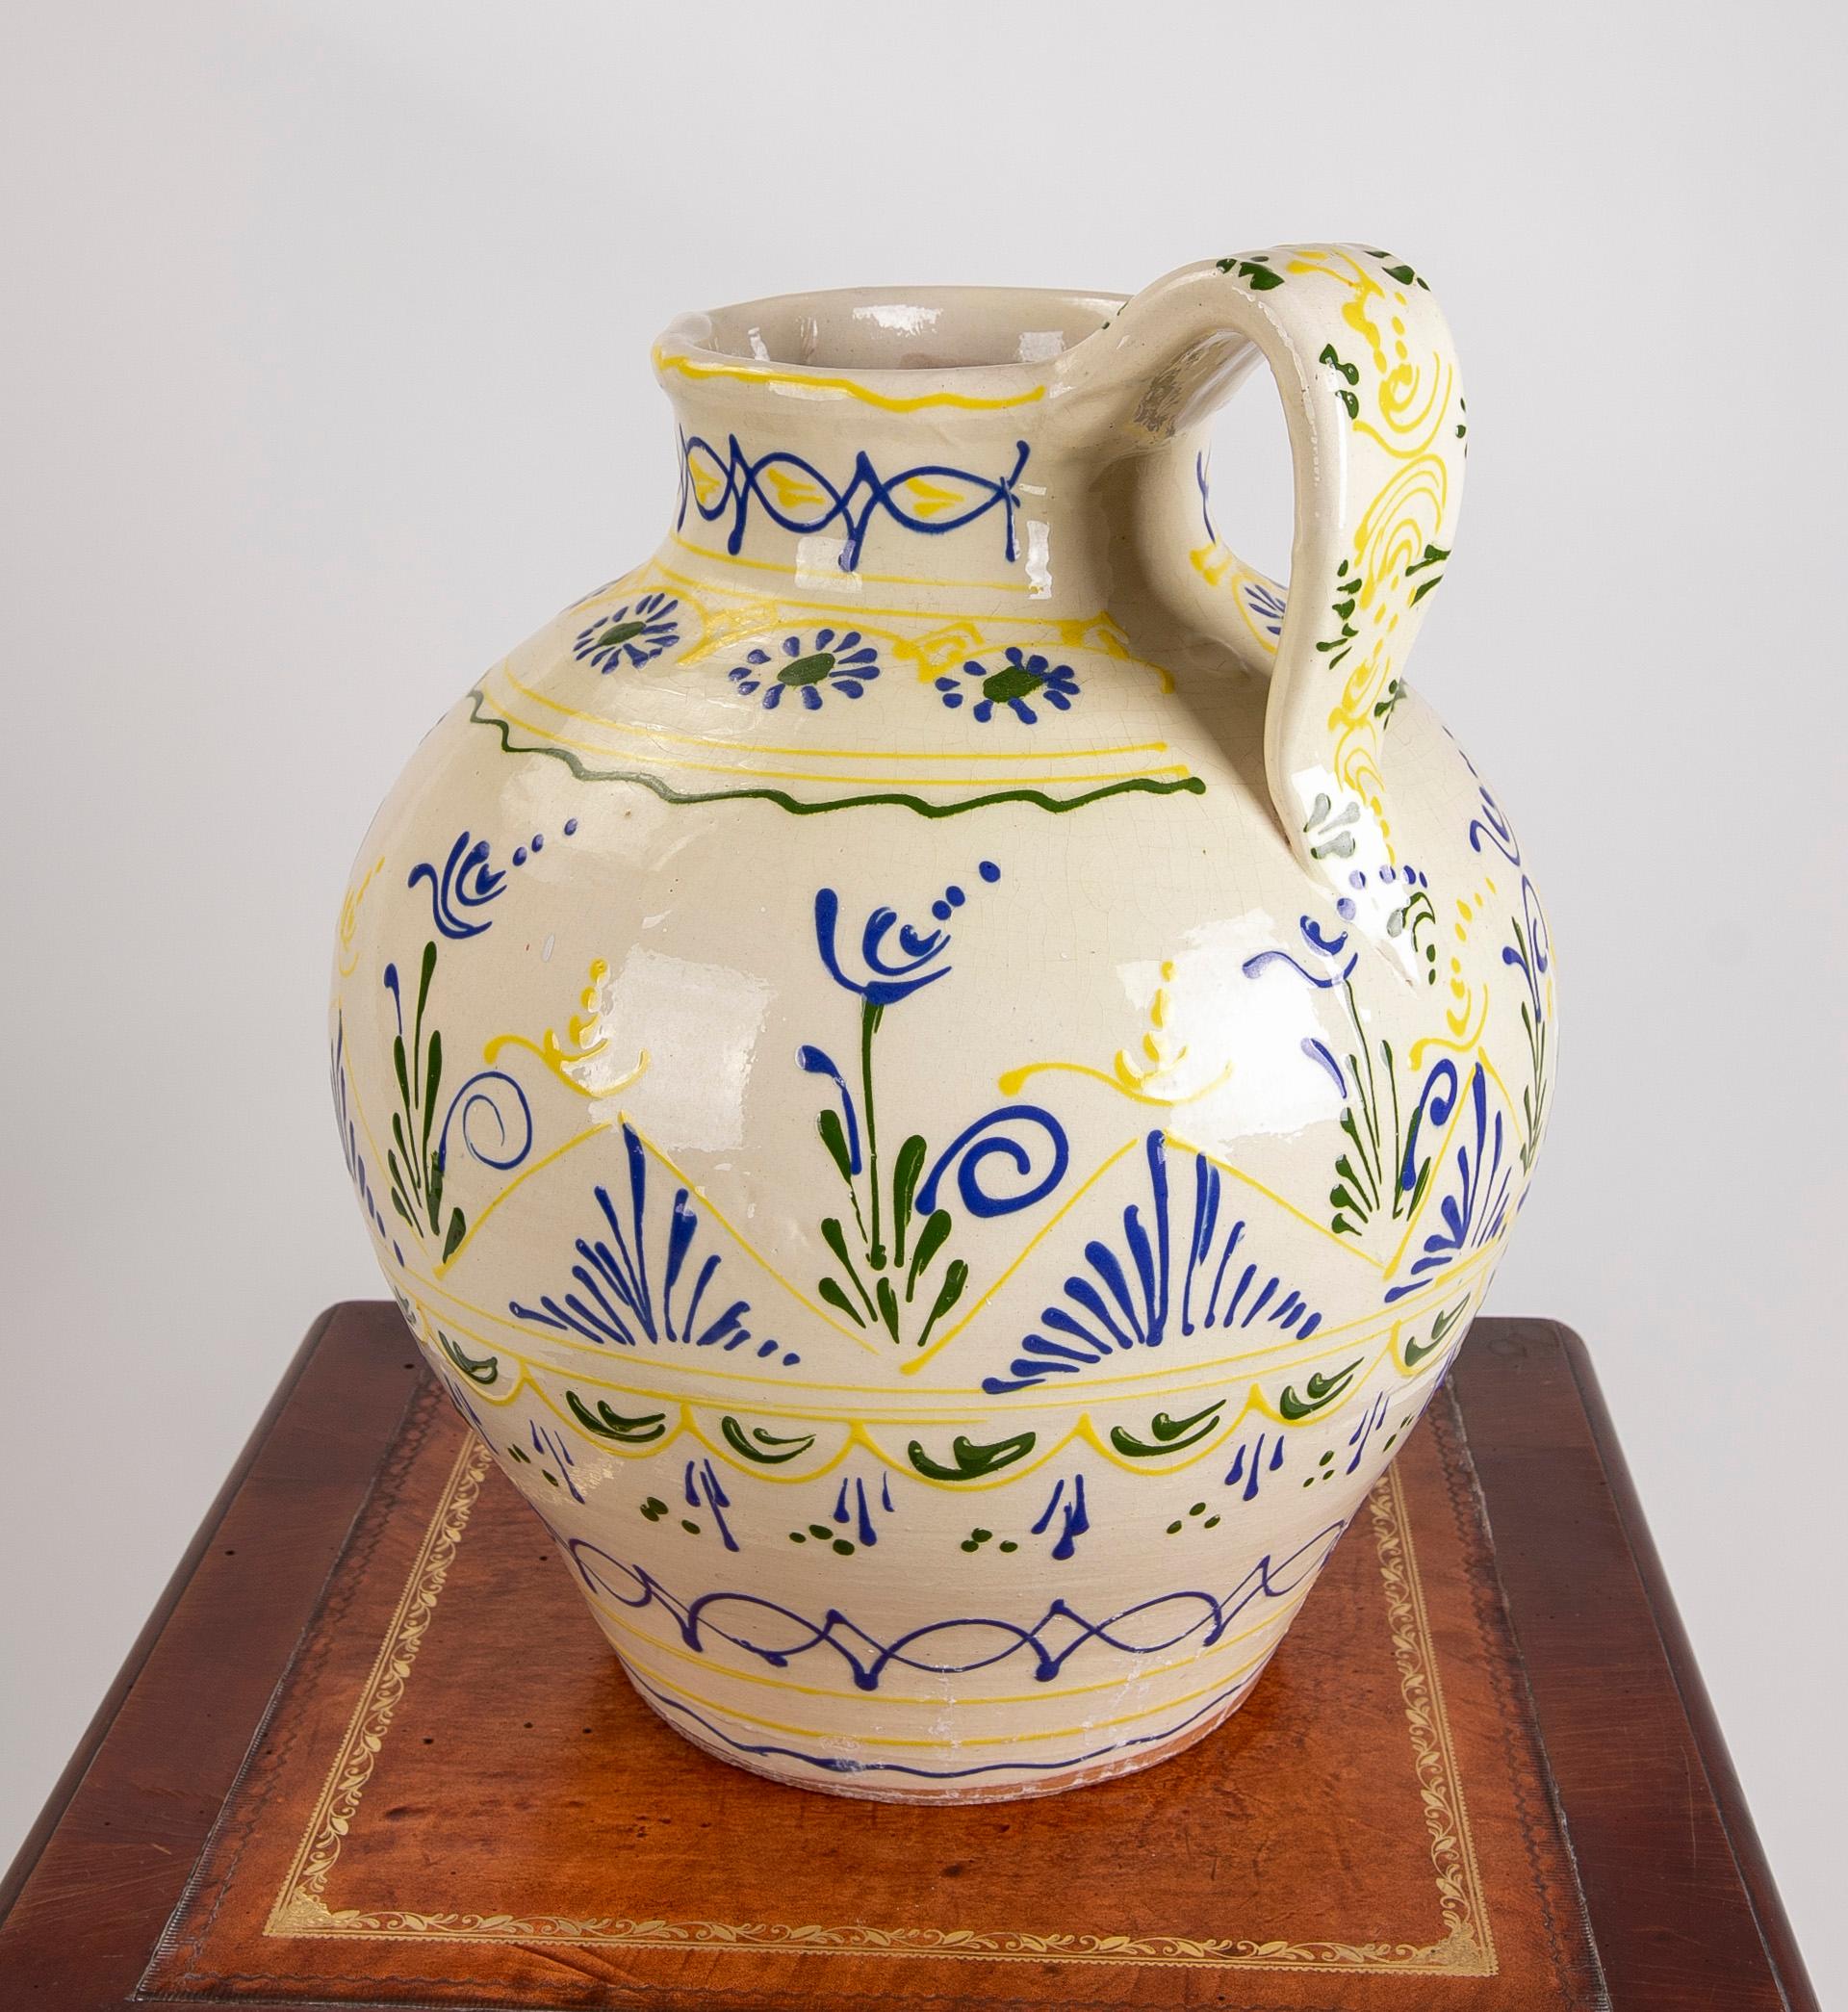 20th Century 1980s Spanish Hand-Painted Ceramic Jug with Handle for Wine For Sale